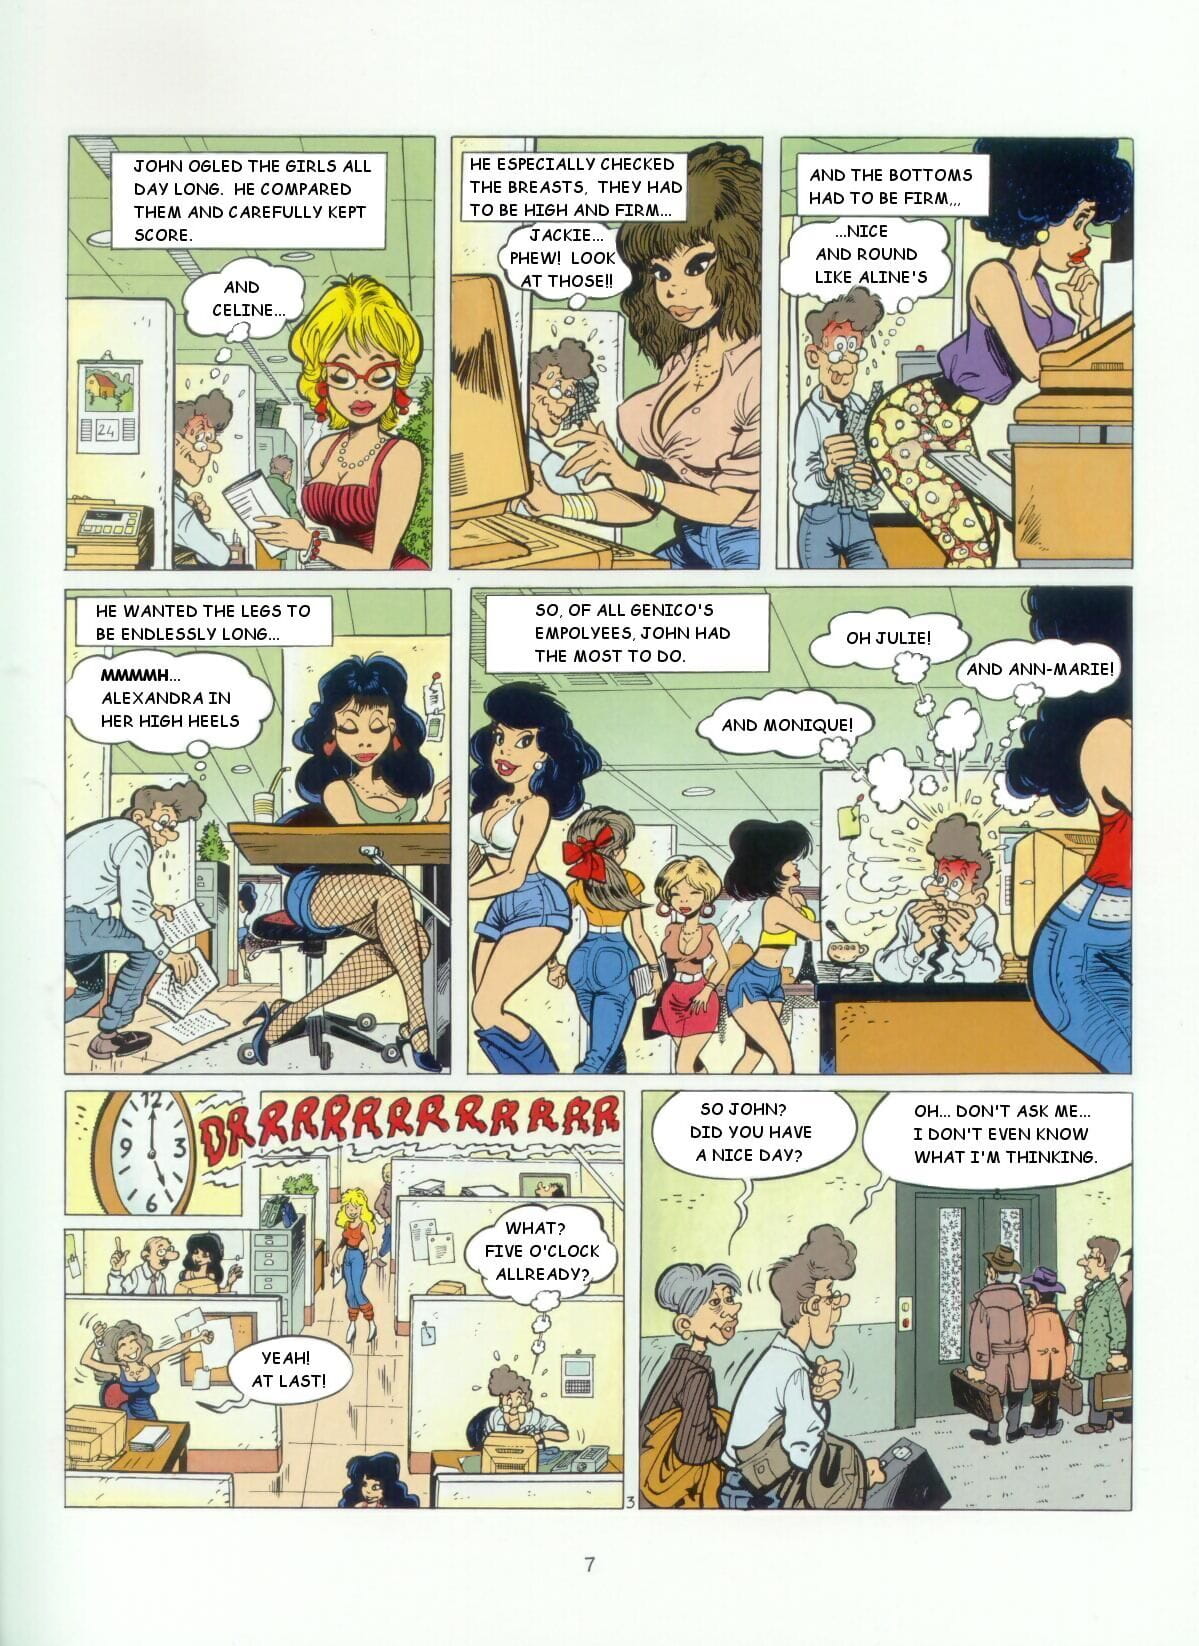 A Real Woman #1 page 1